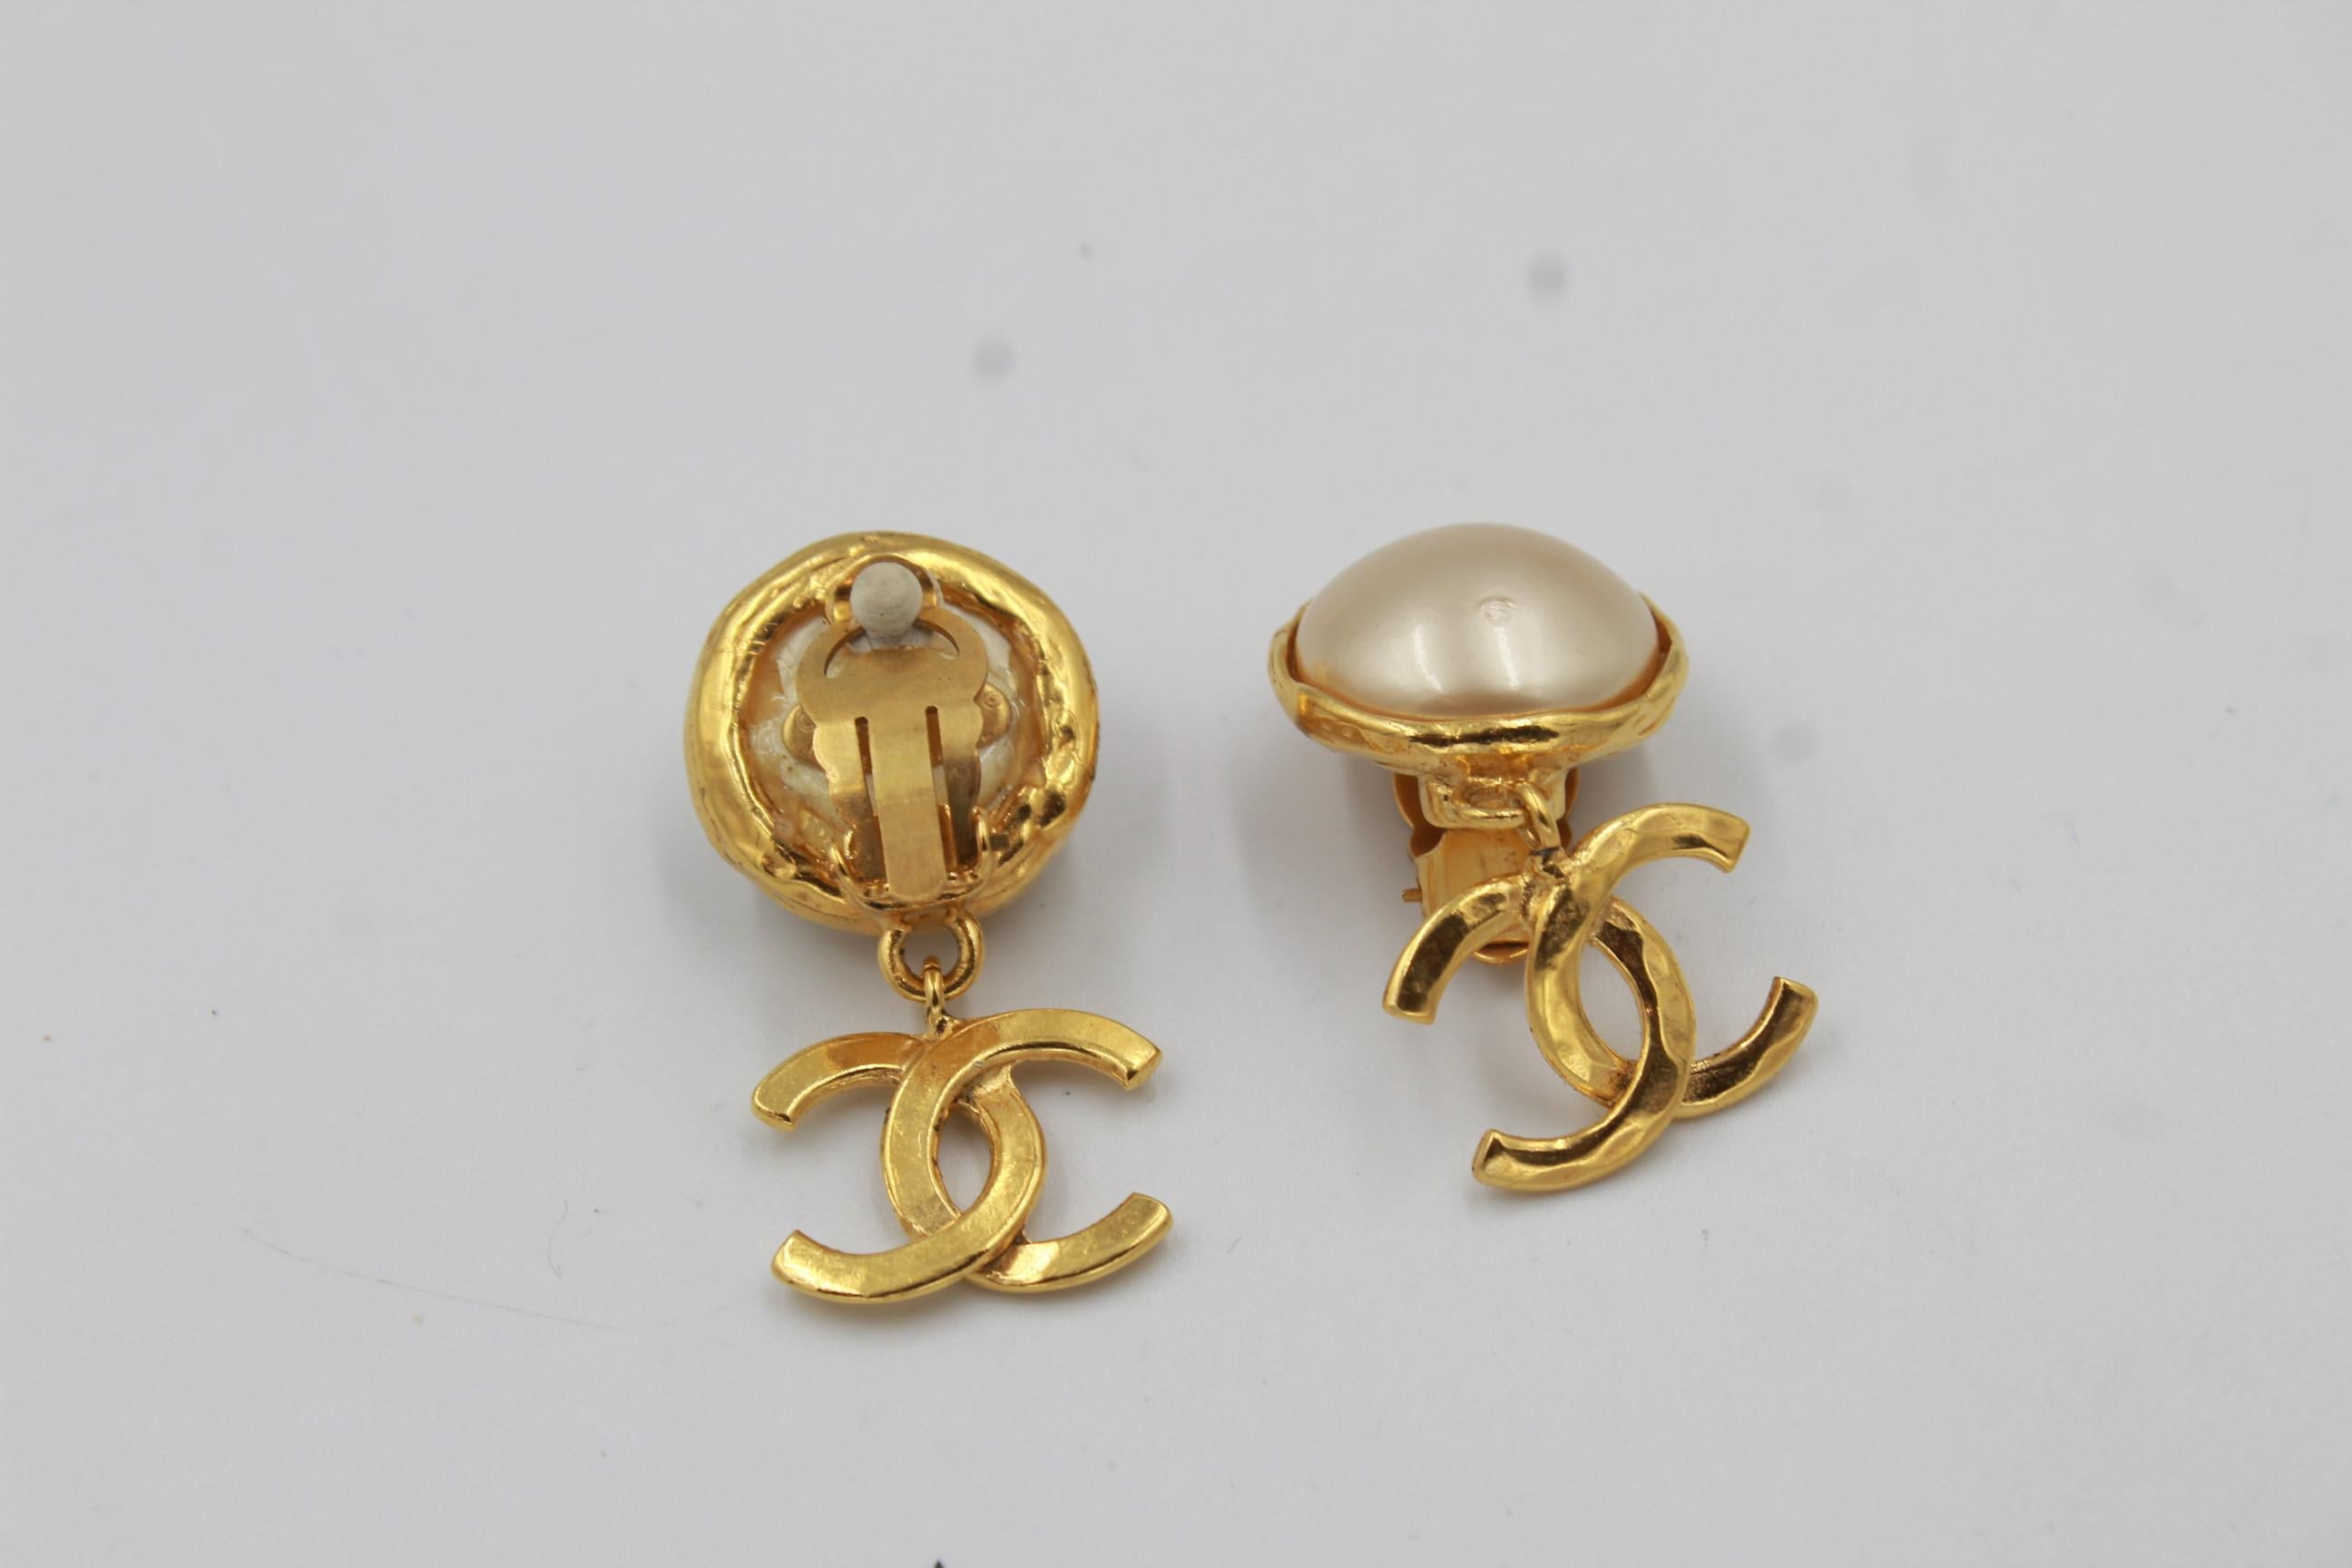 Vintage Chanel earring in gold metal and pearl.
Good condition, with some light signs of wear.
4cm.